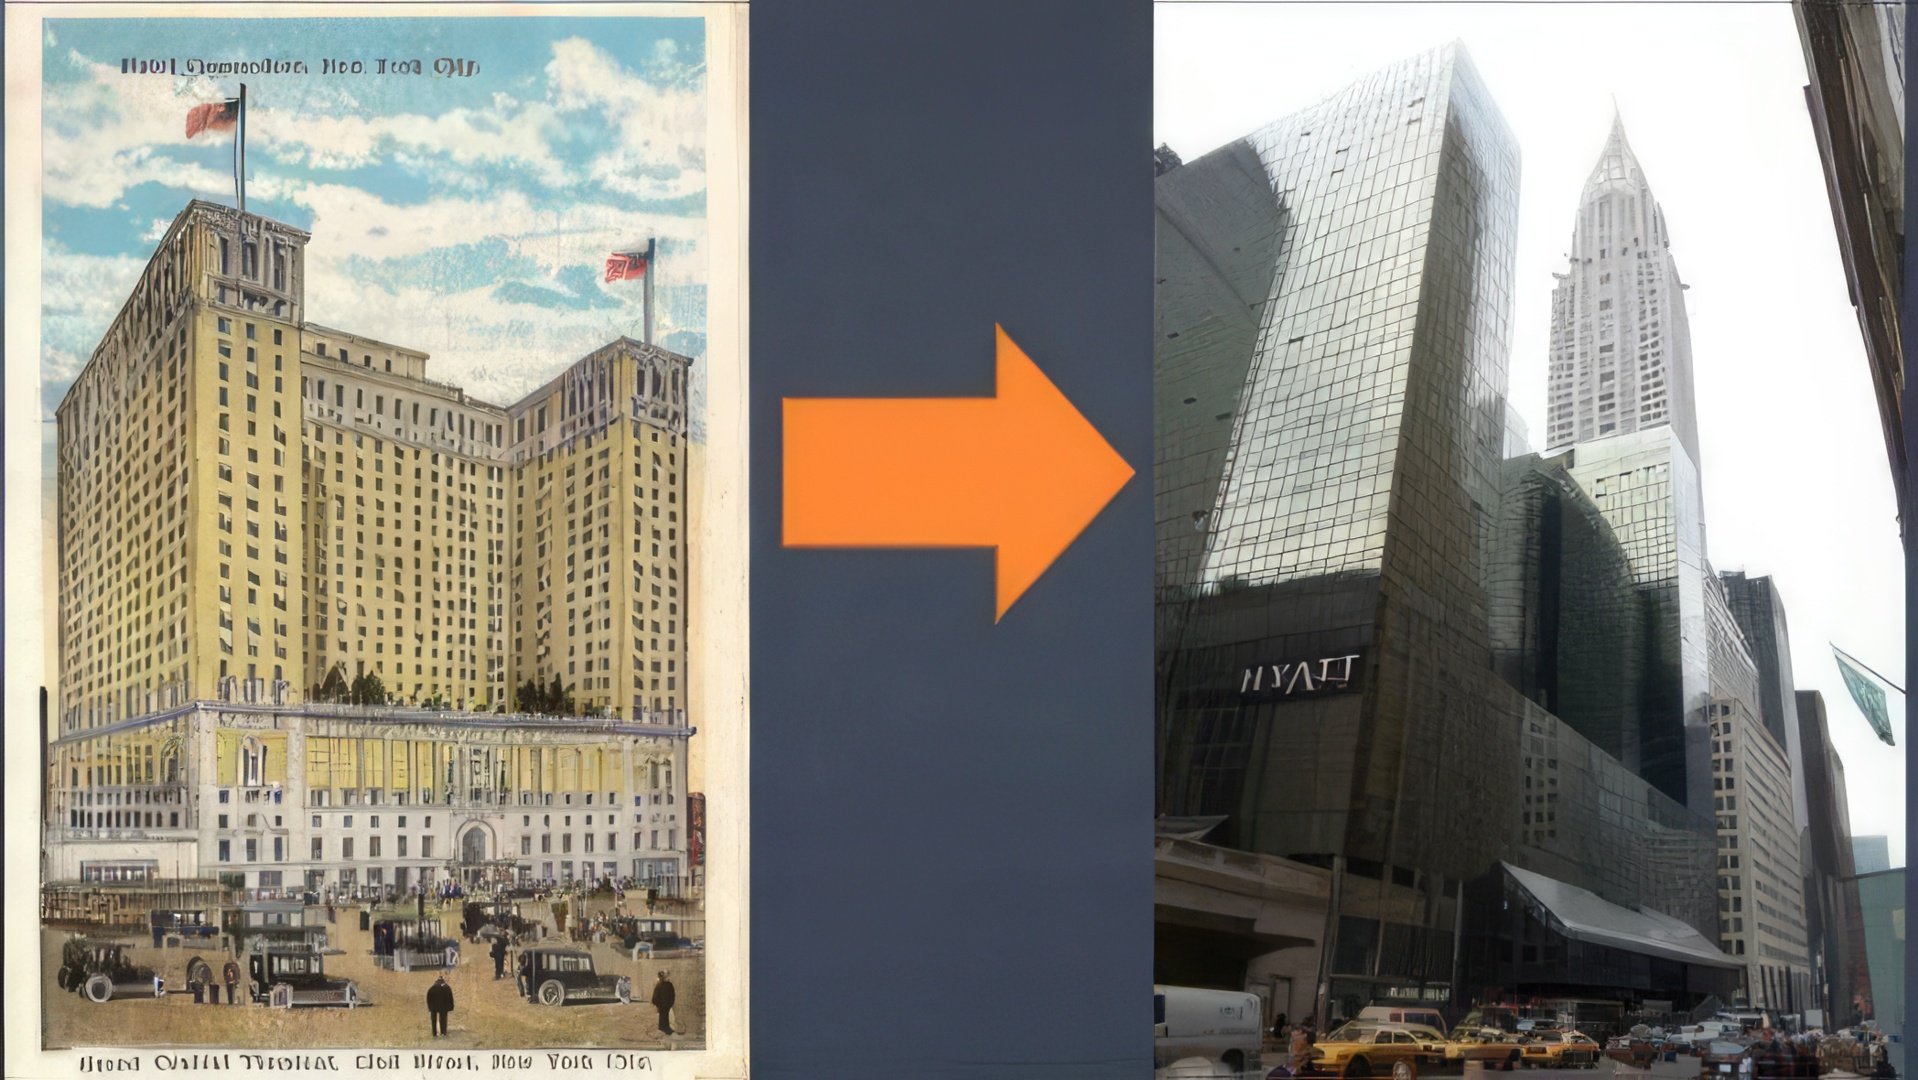 The Commodore Hotel before and after Trump's renovation